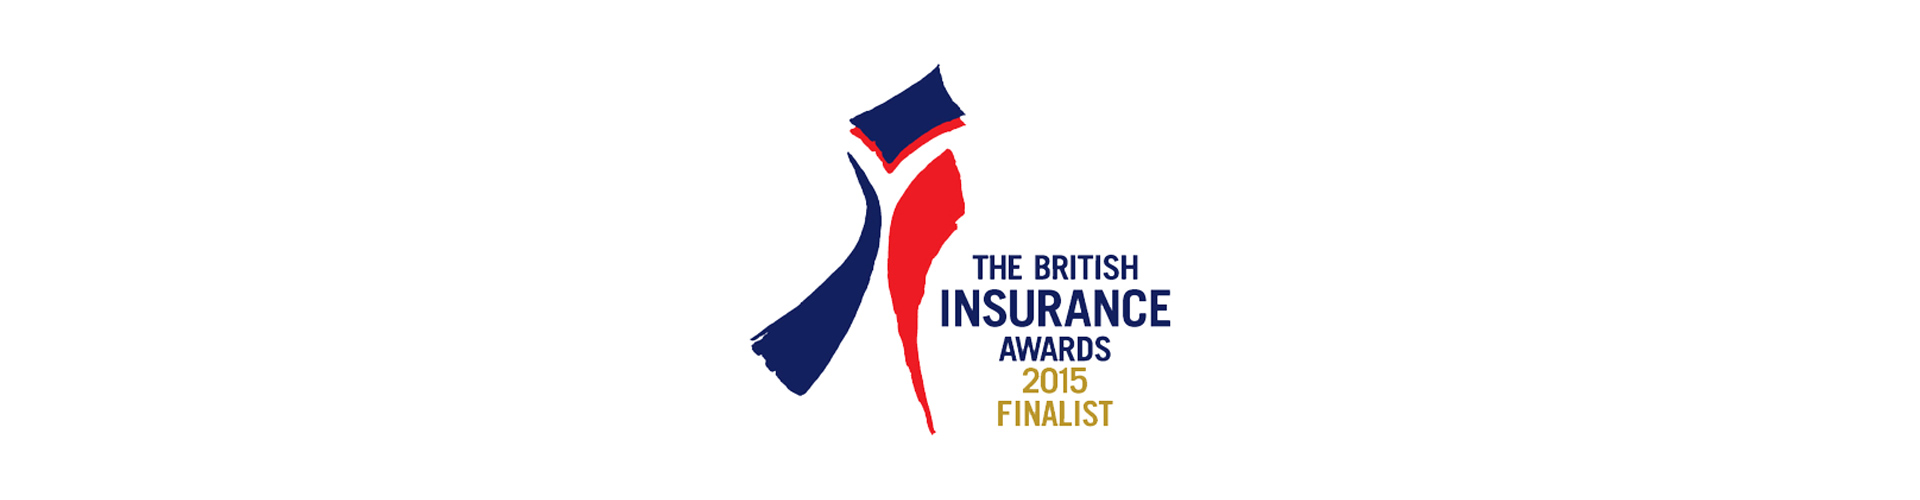 Hood Group shortlisted for a 2015 British Insurance Award